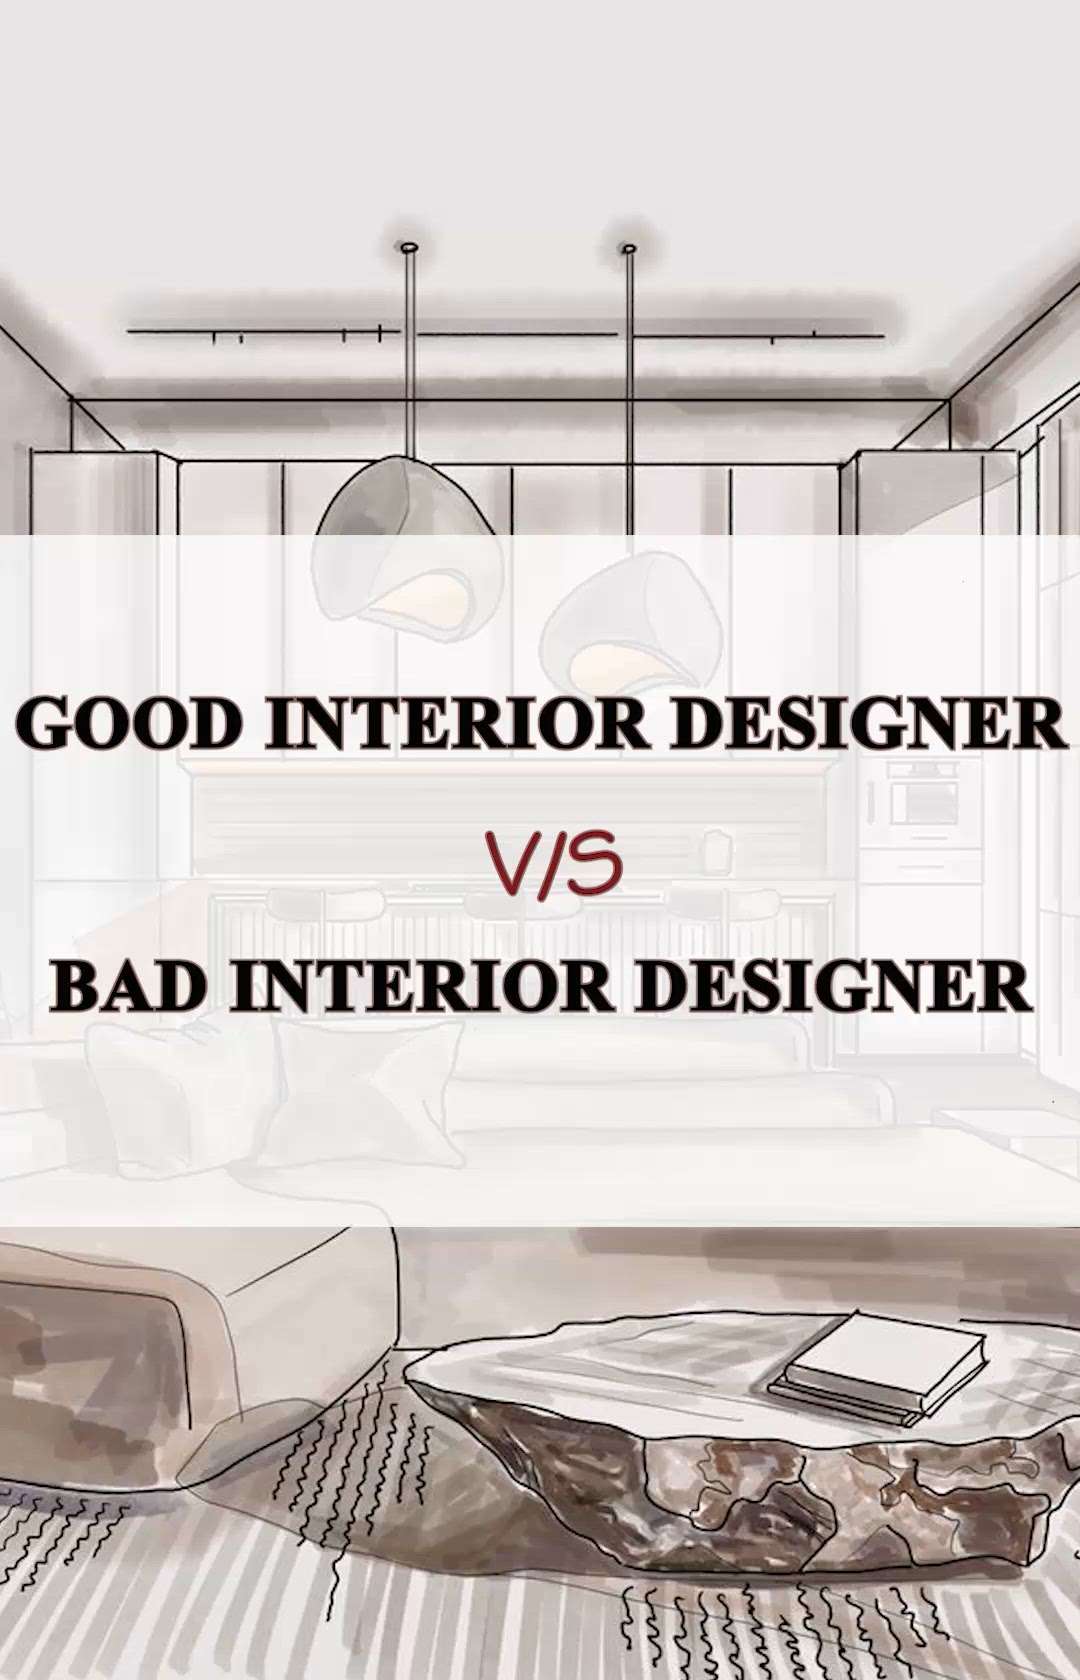 what is interior designing? 
The difference between a good interior designer and bad interior designer? 
What are the duties of interior designer 

#creatorsofkolo #3ways #interior #beautiful #home #ambiance #InteriorDesigner #importanceofinteriordesigner #good #bad #design #qualities #lighting #decor #workethics #unethicalworks #home #house #budgetfriendly #interiordecor #interiorstyling #InteriorDesigner #interiorpainting #designprocess #kerala #eranakulam #designing #KitchenInterior #right #lights